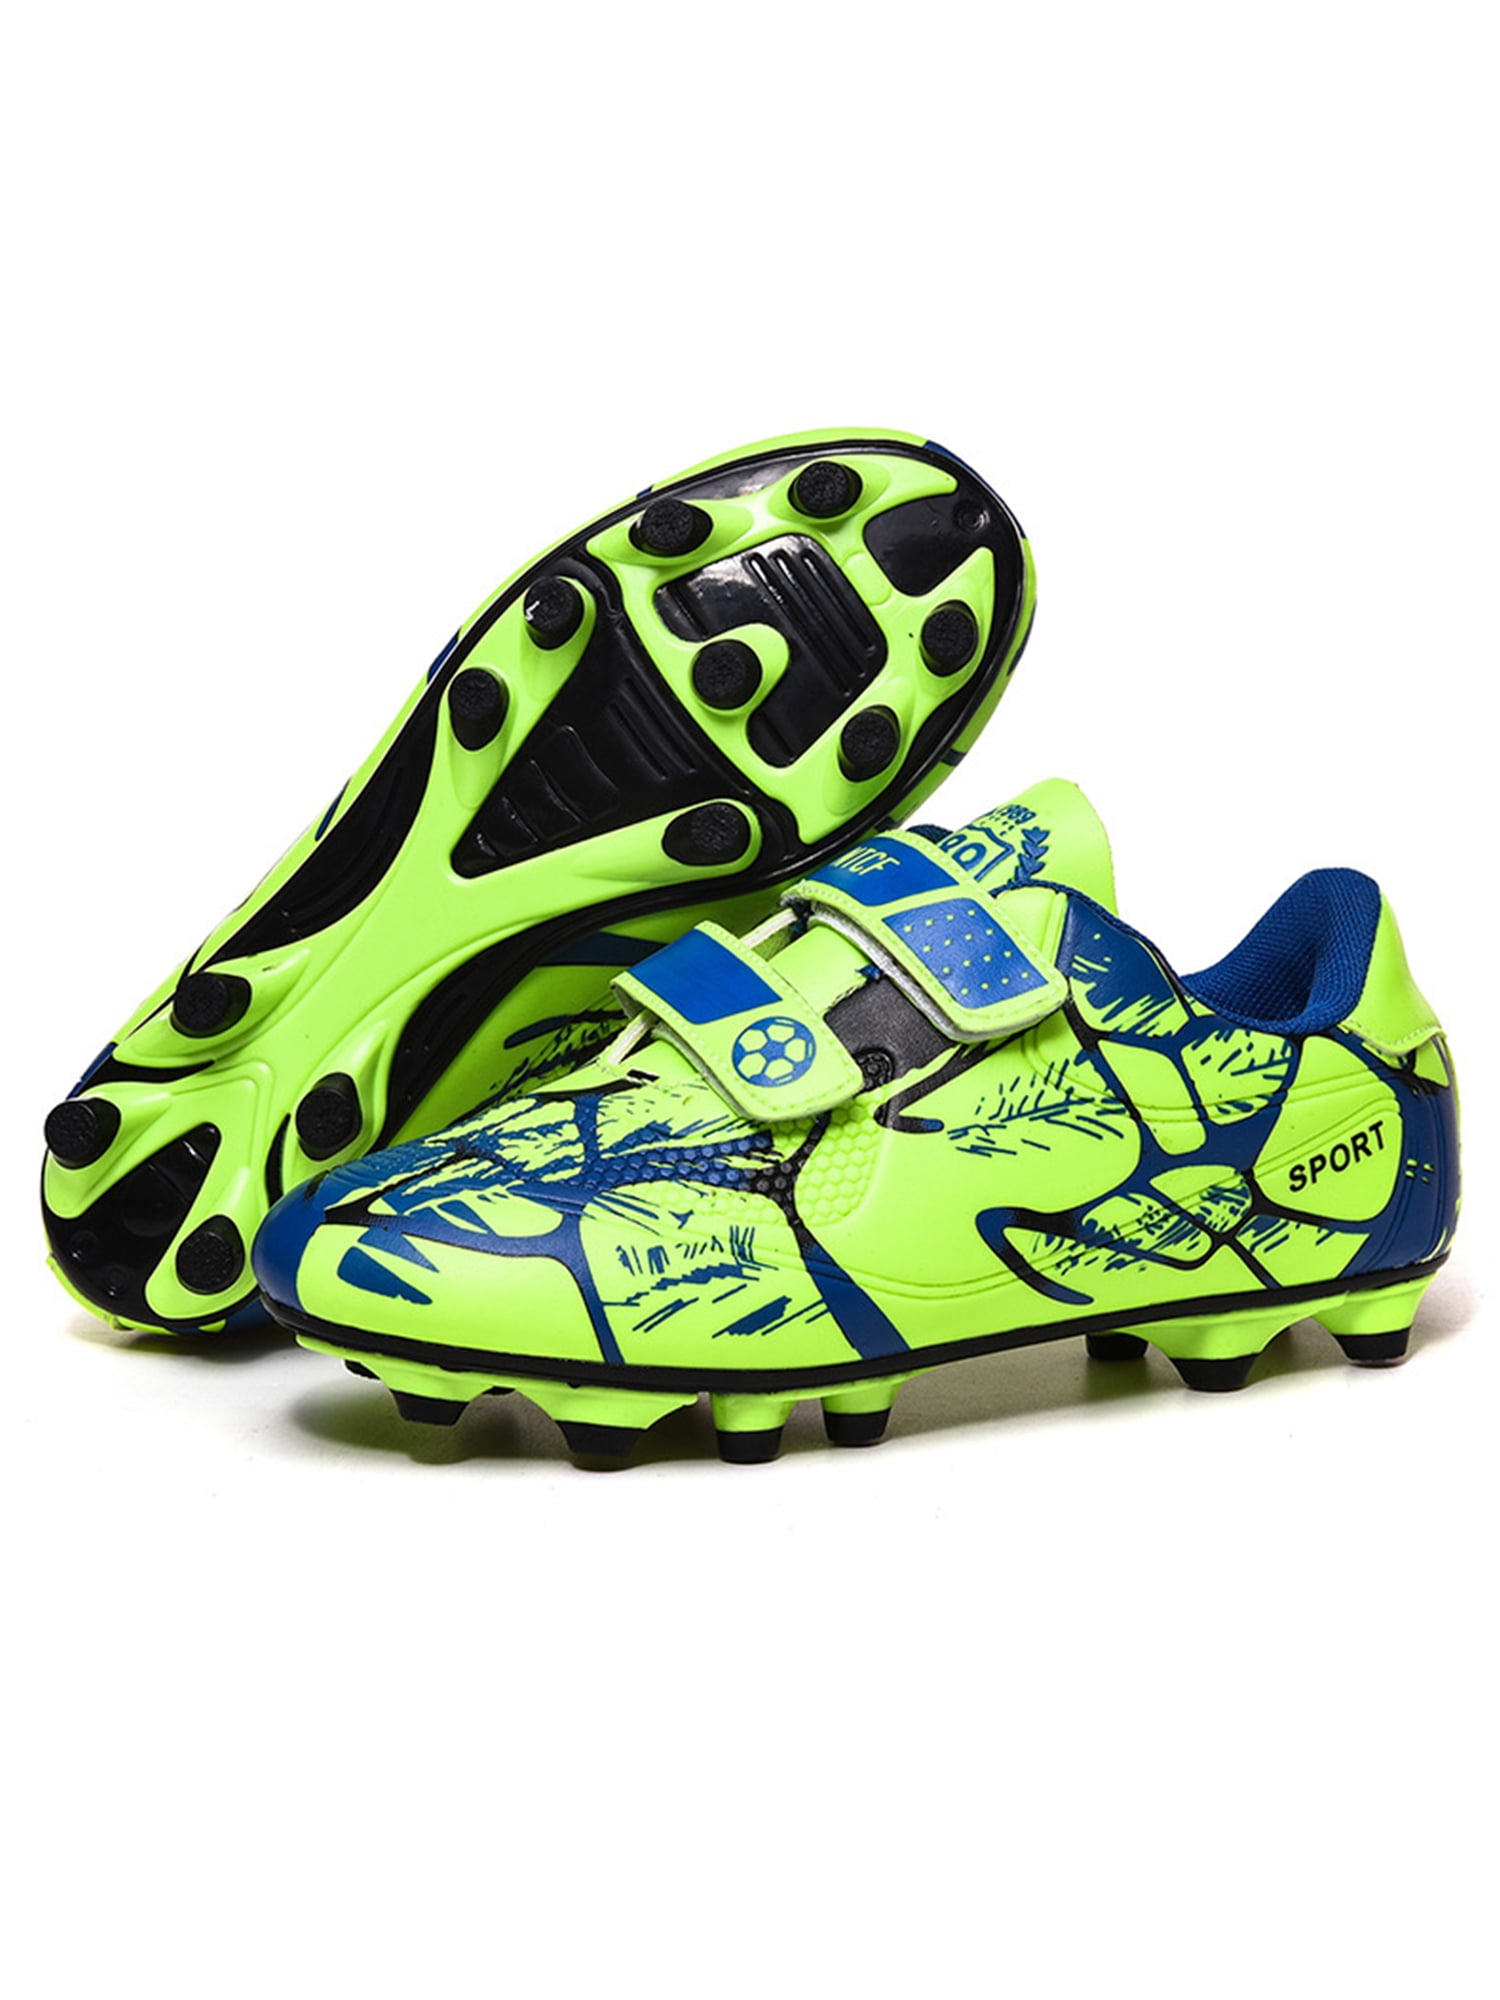 Woobling Kids Soccer Cleats Boys Girls Athletic Football Shoes Outdoor Anti-Slip Magic Soccer Shoes 10C-4.5Y - Walmart.com